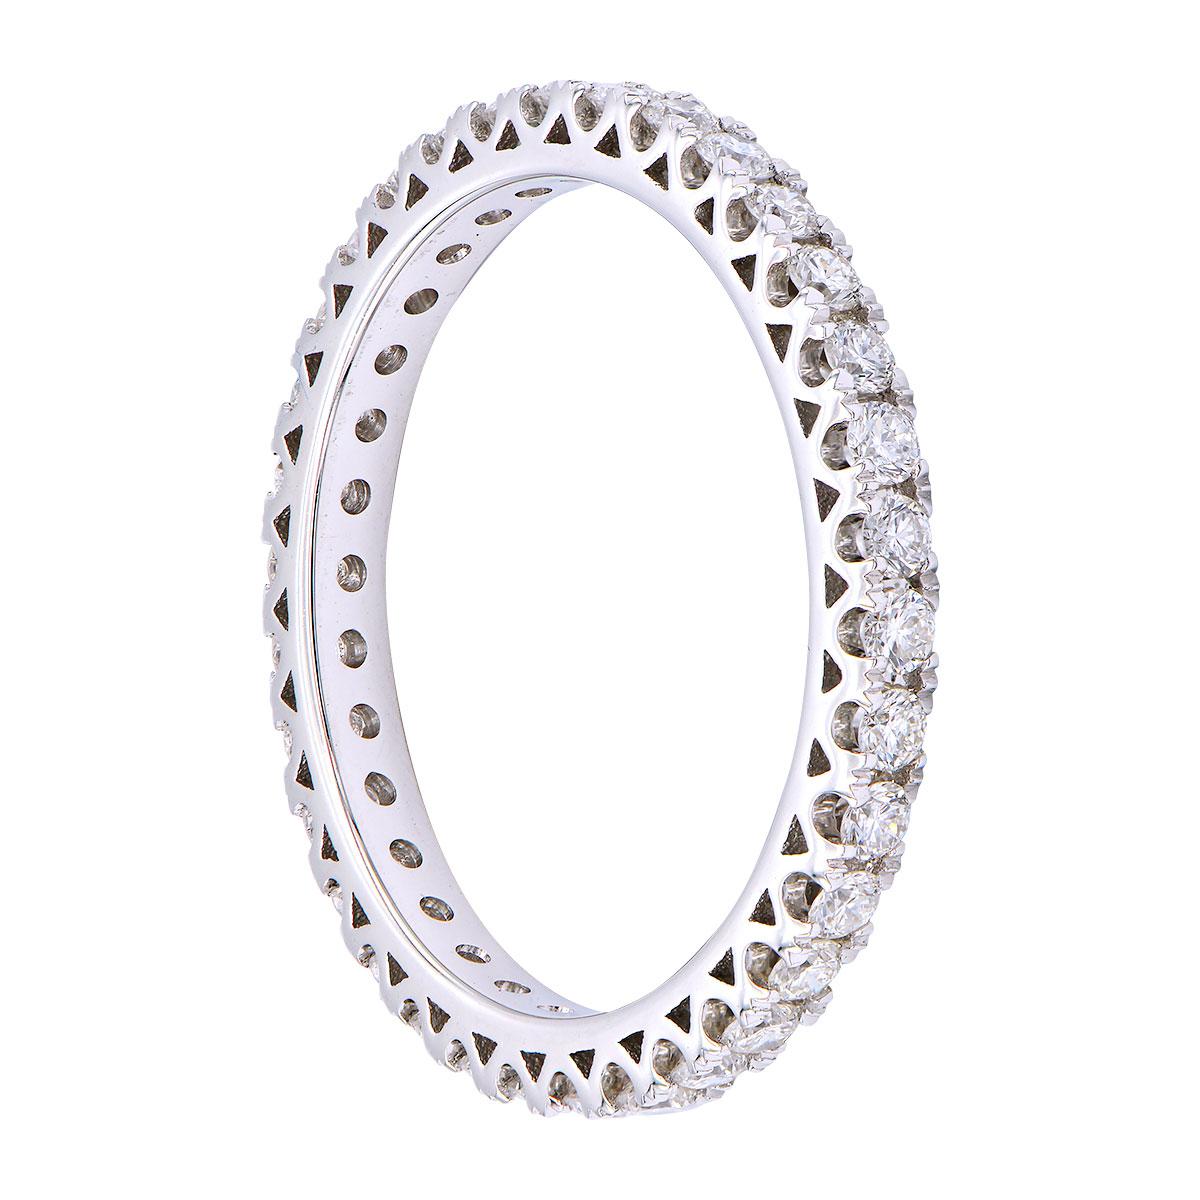 This gorgeous diamond eternity band has 34 round VS2, G color diamonds totaling 0.62 carats. They are set in 1.8 grams of 18 karat white gold. The gold prongs add a beautiful detail from the sides and it has a smooth comfortable fit. This ring is